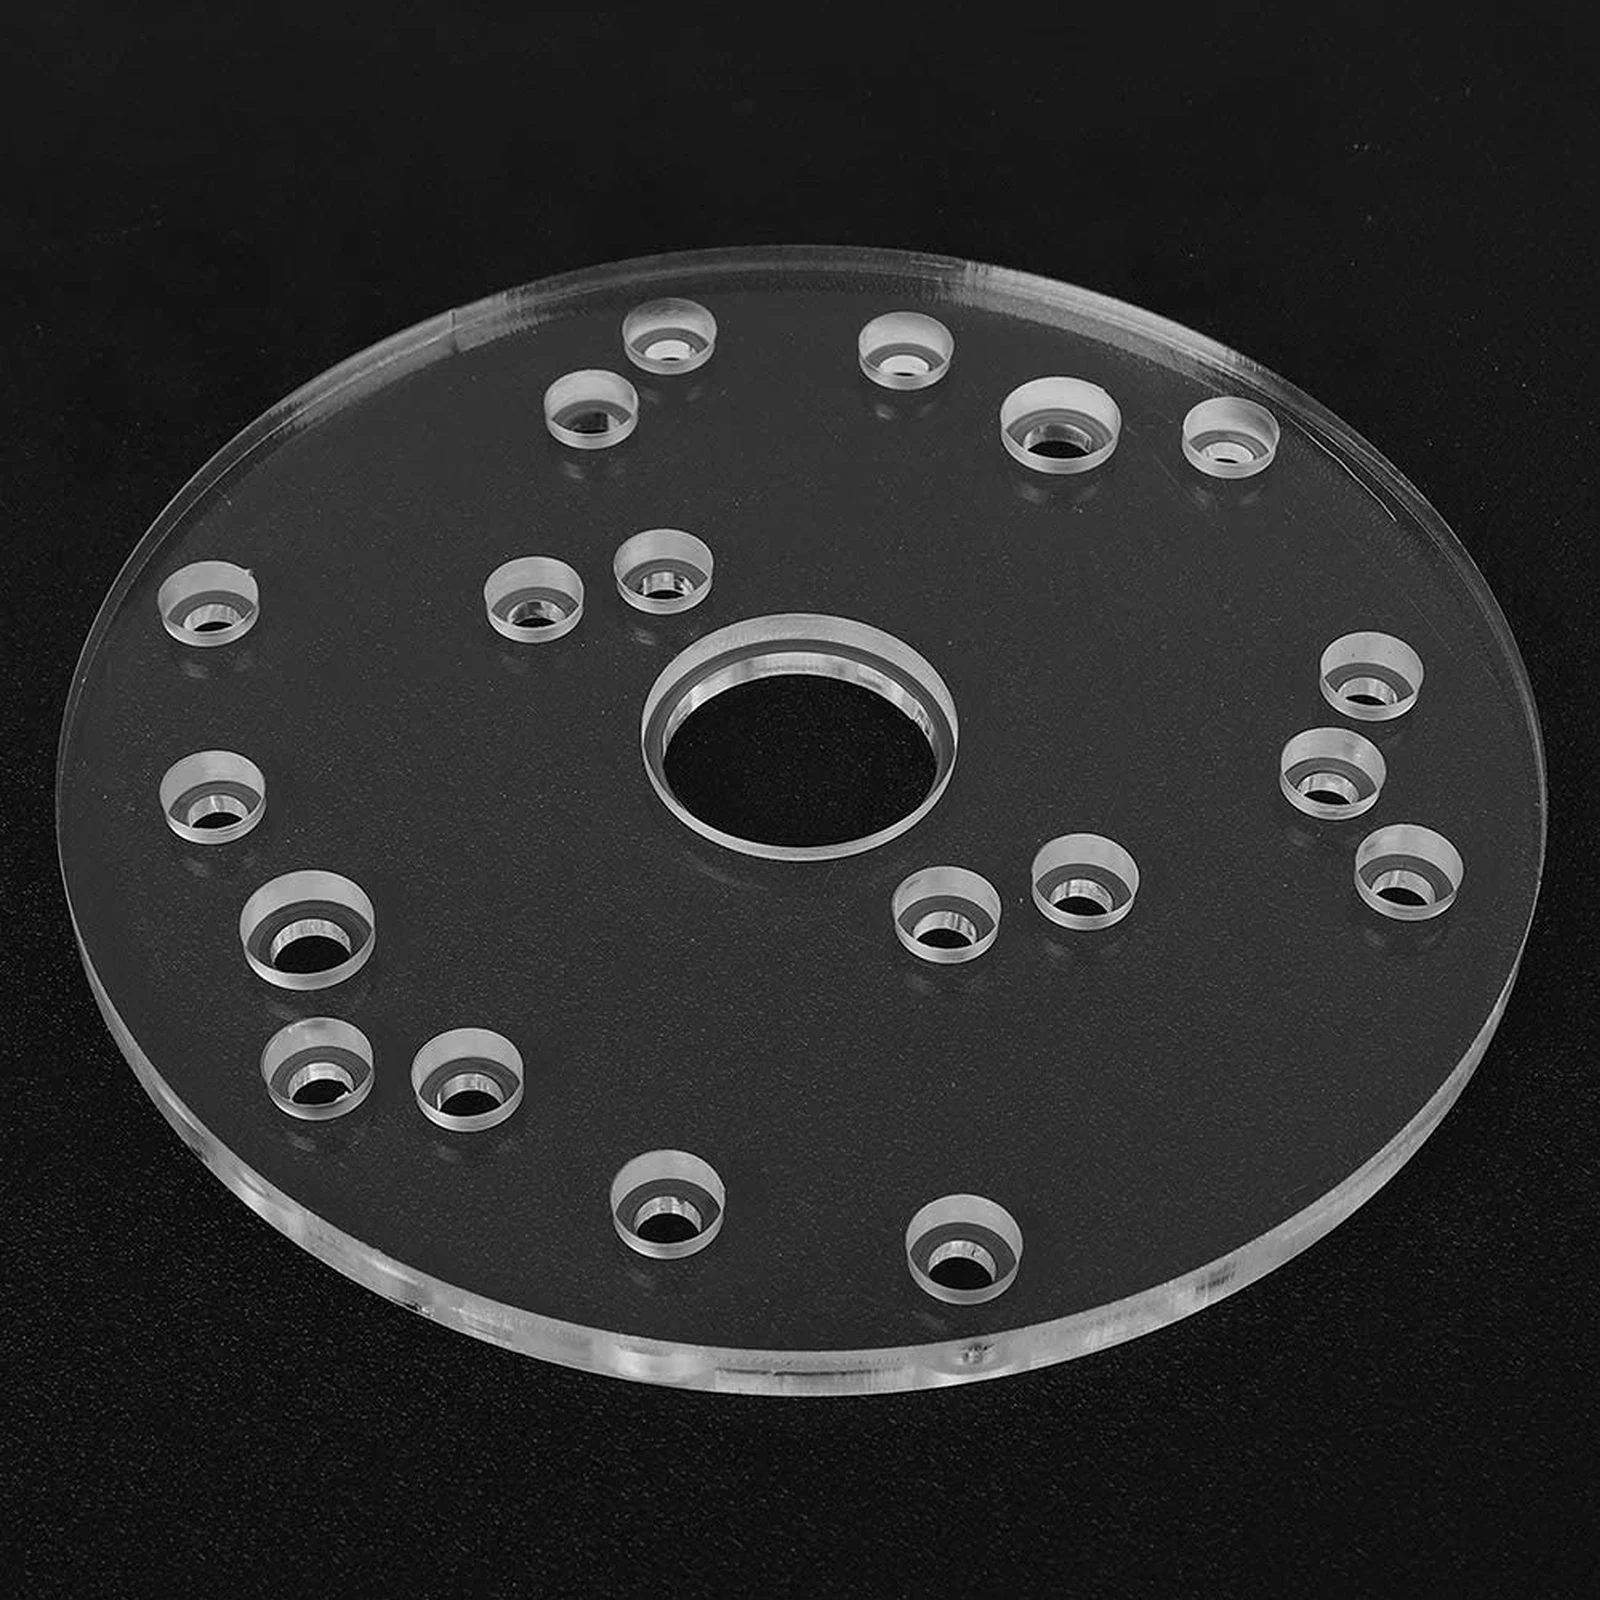 router woodworking Woodworking Power Tools Base Plate Accurately Acrylic Translucent High-quality Universal With Screws For Various Router Sizes wood cnc machine